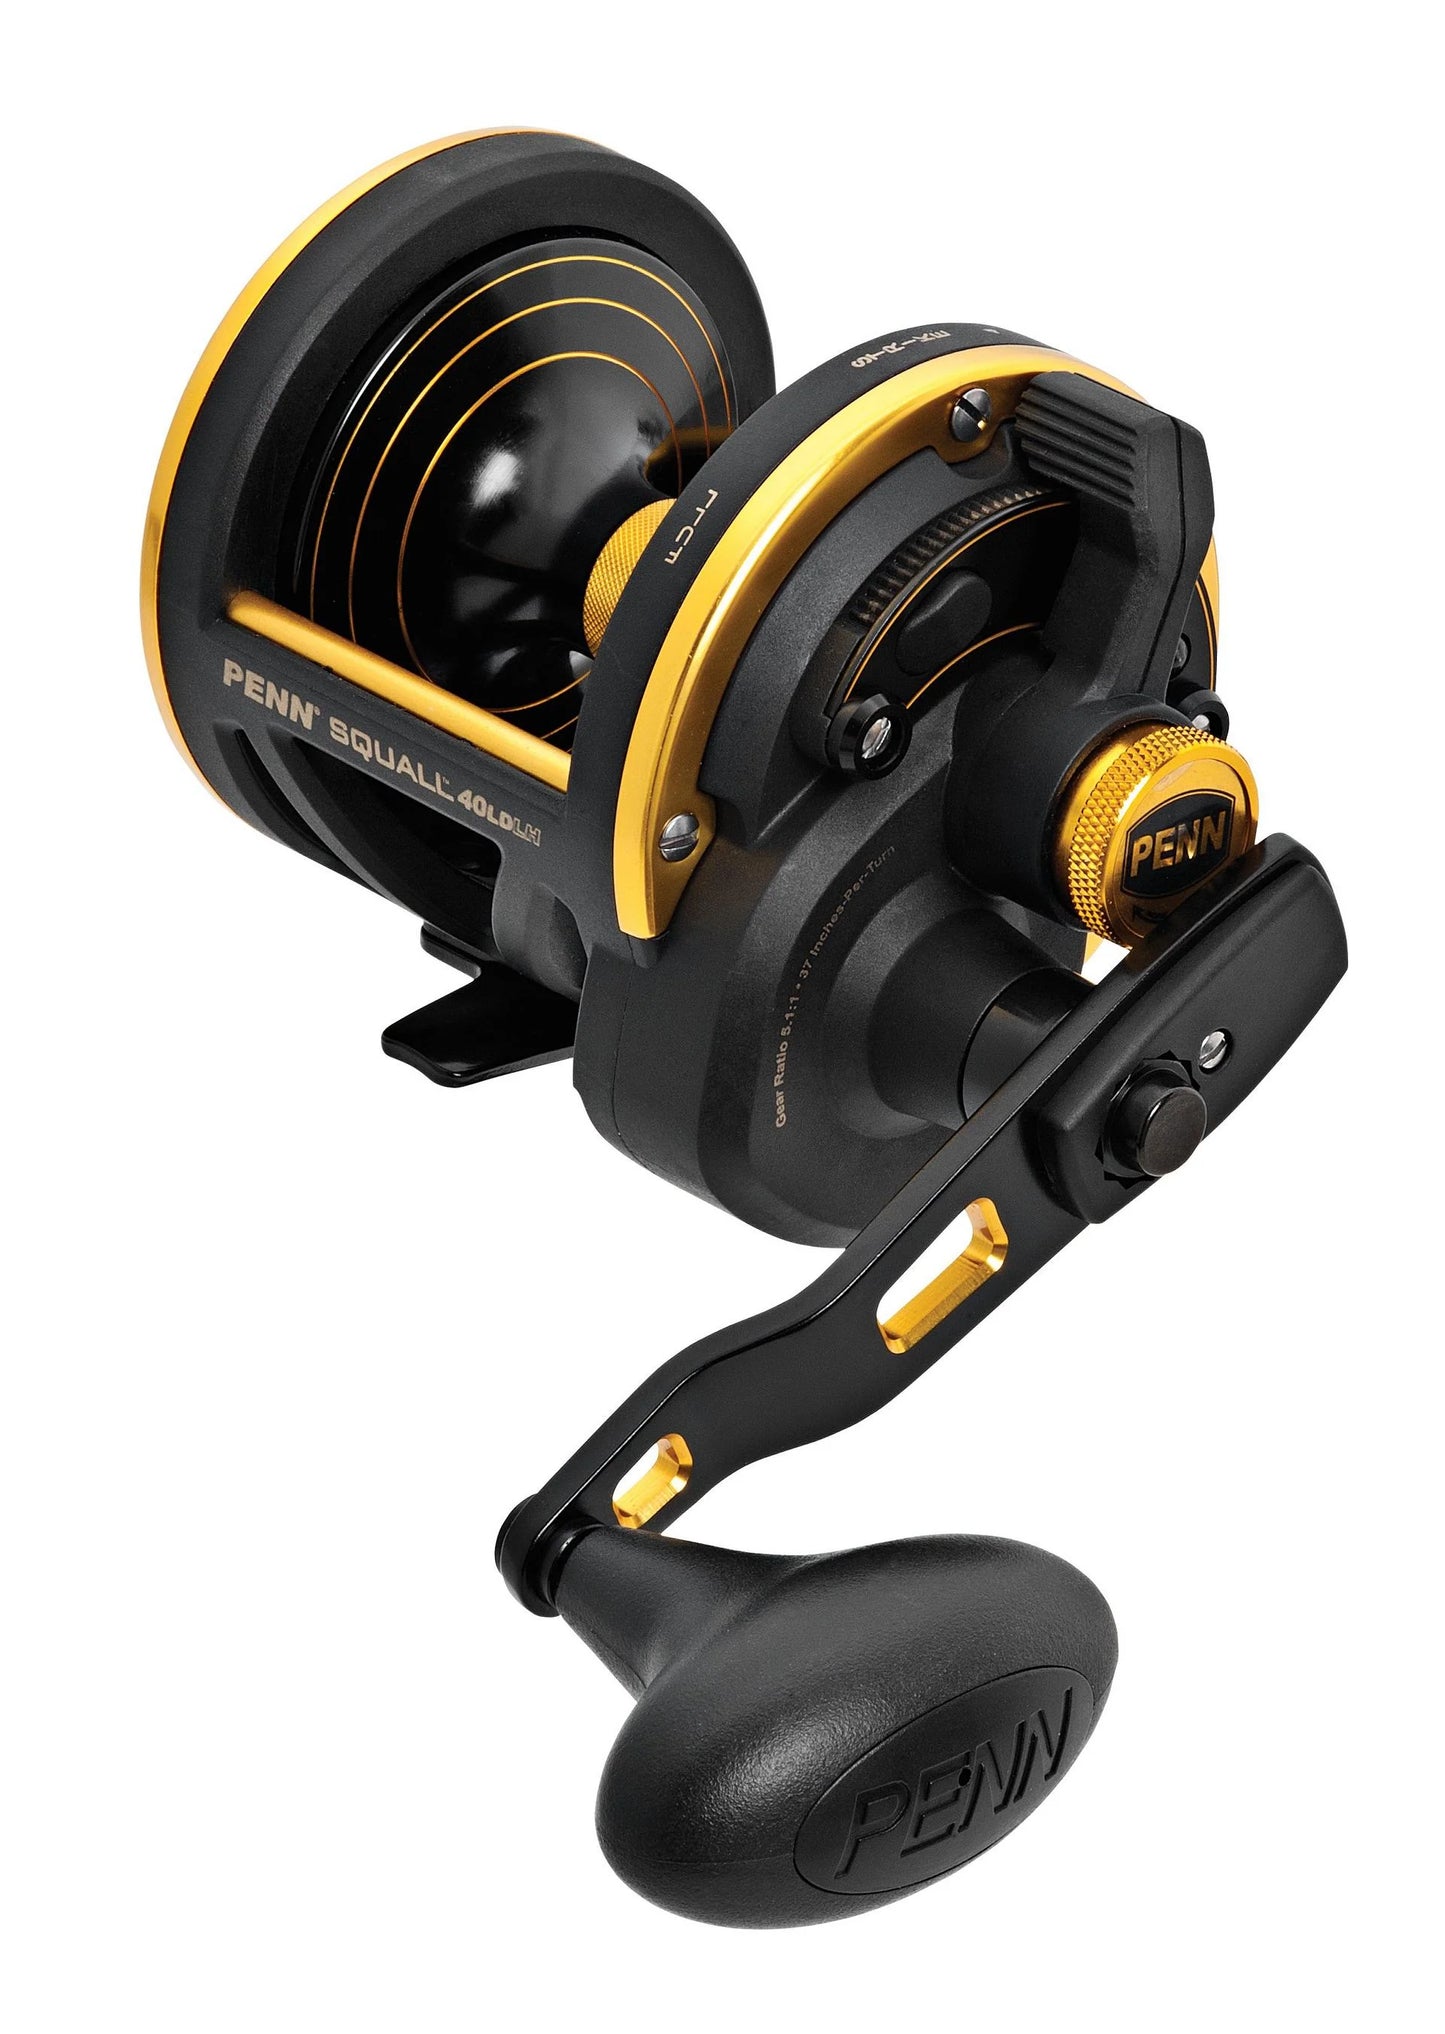 PENN SQUALL® LEVER DRAG CONVENTIONAL REEL